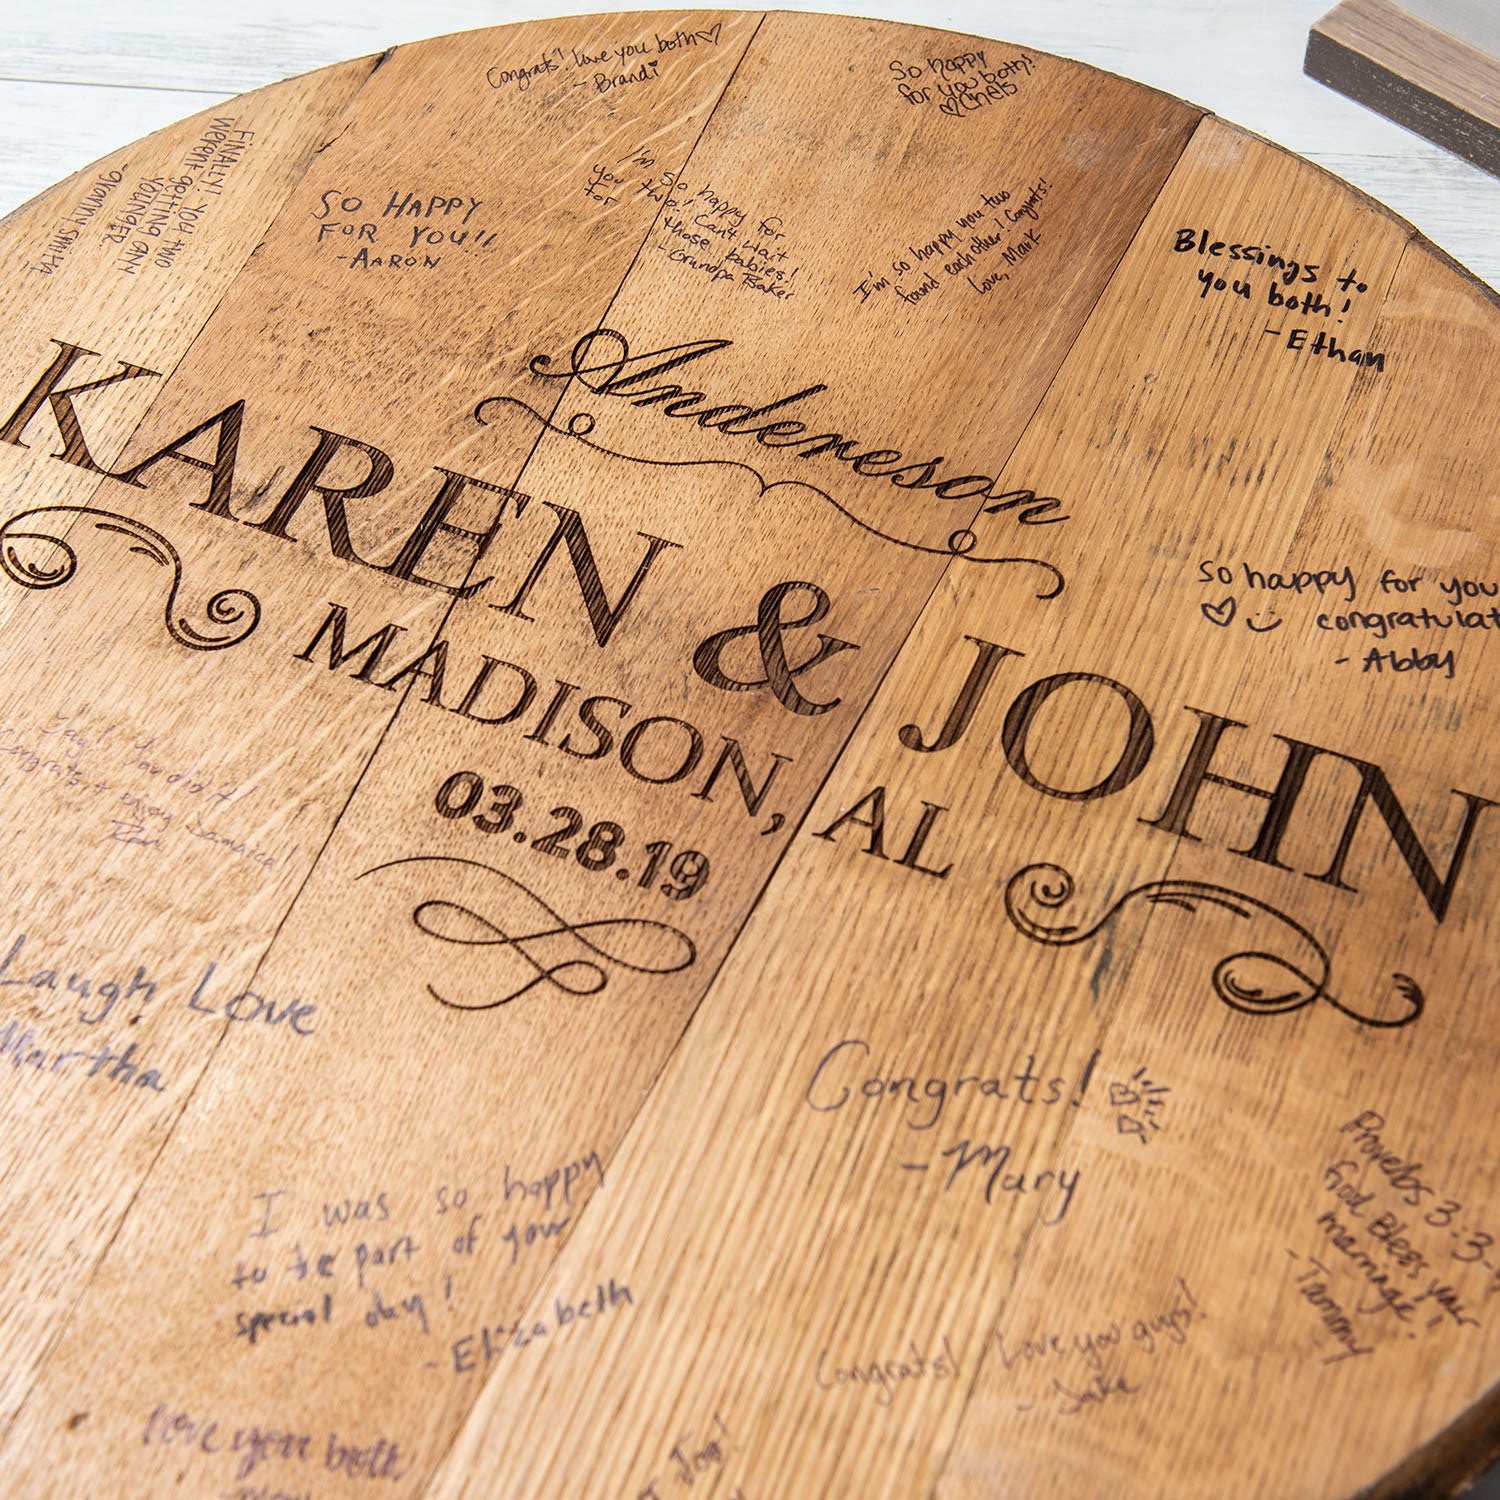 Tennessee whiskey barrel head wood wedding guestbook sign with personalization